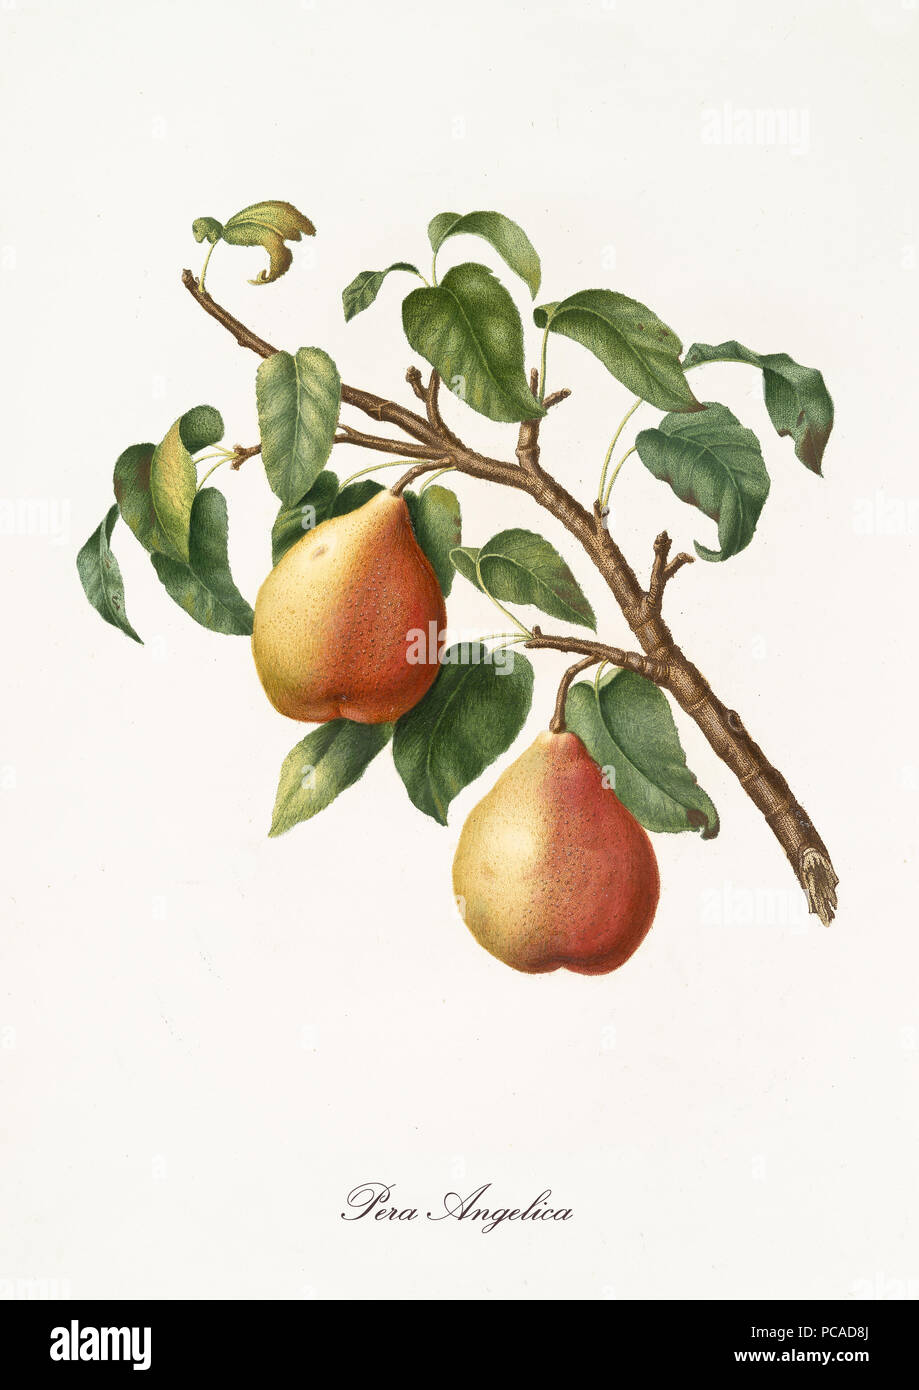 Two yellow Pears with little orange gradients, called angelica pear, on a single branch with leaves on white background. Old botanical detailed illustration realized by Giorgio Gallesio on 1817, 1839 Stock Photo